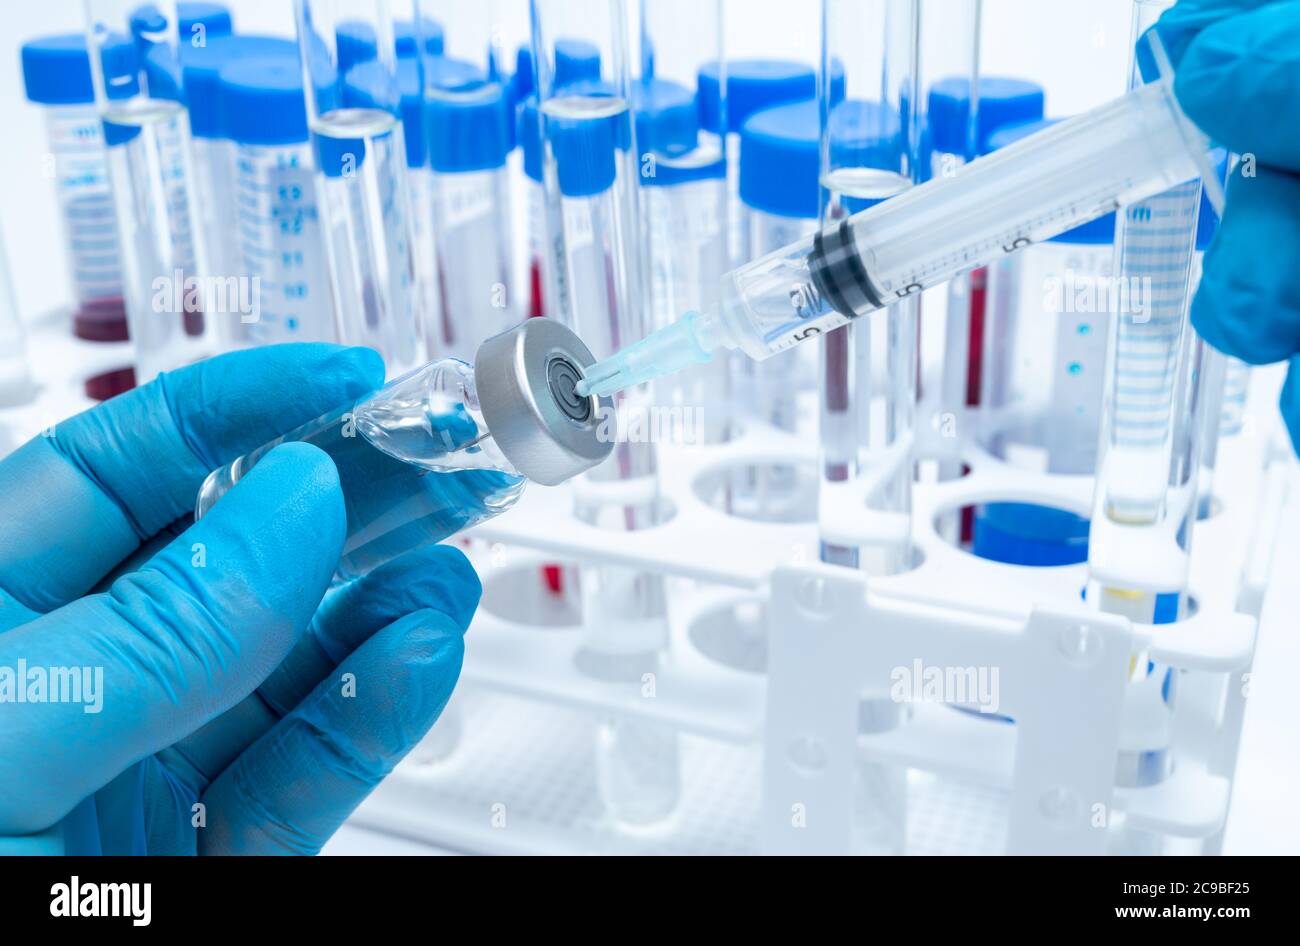 Scientist's hand wearing blue gloves and holding an ampoule and syringe. Stock Photo